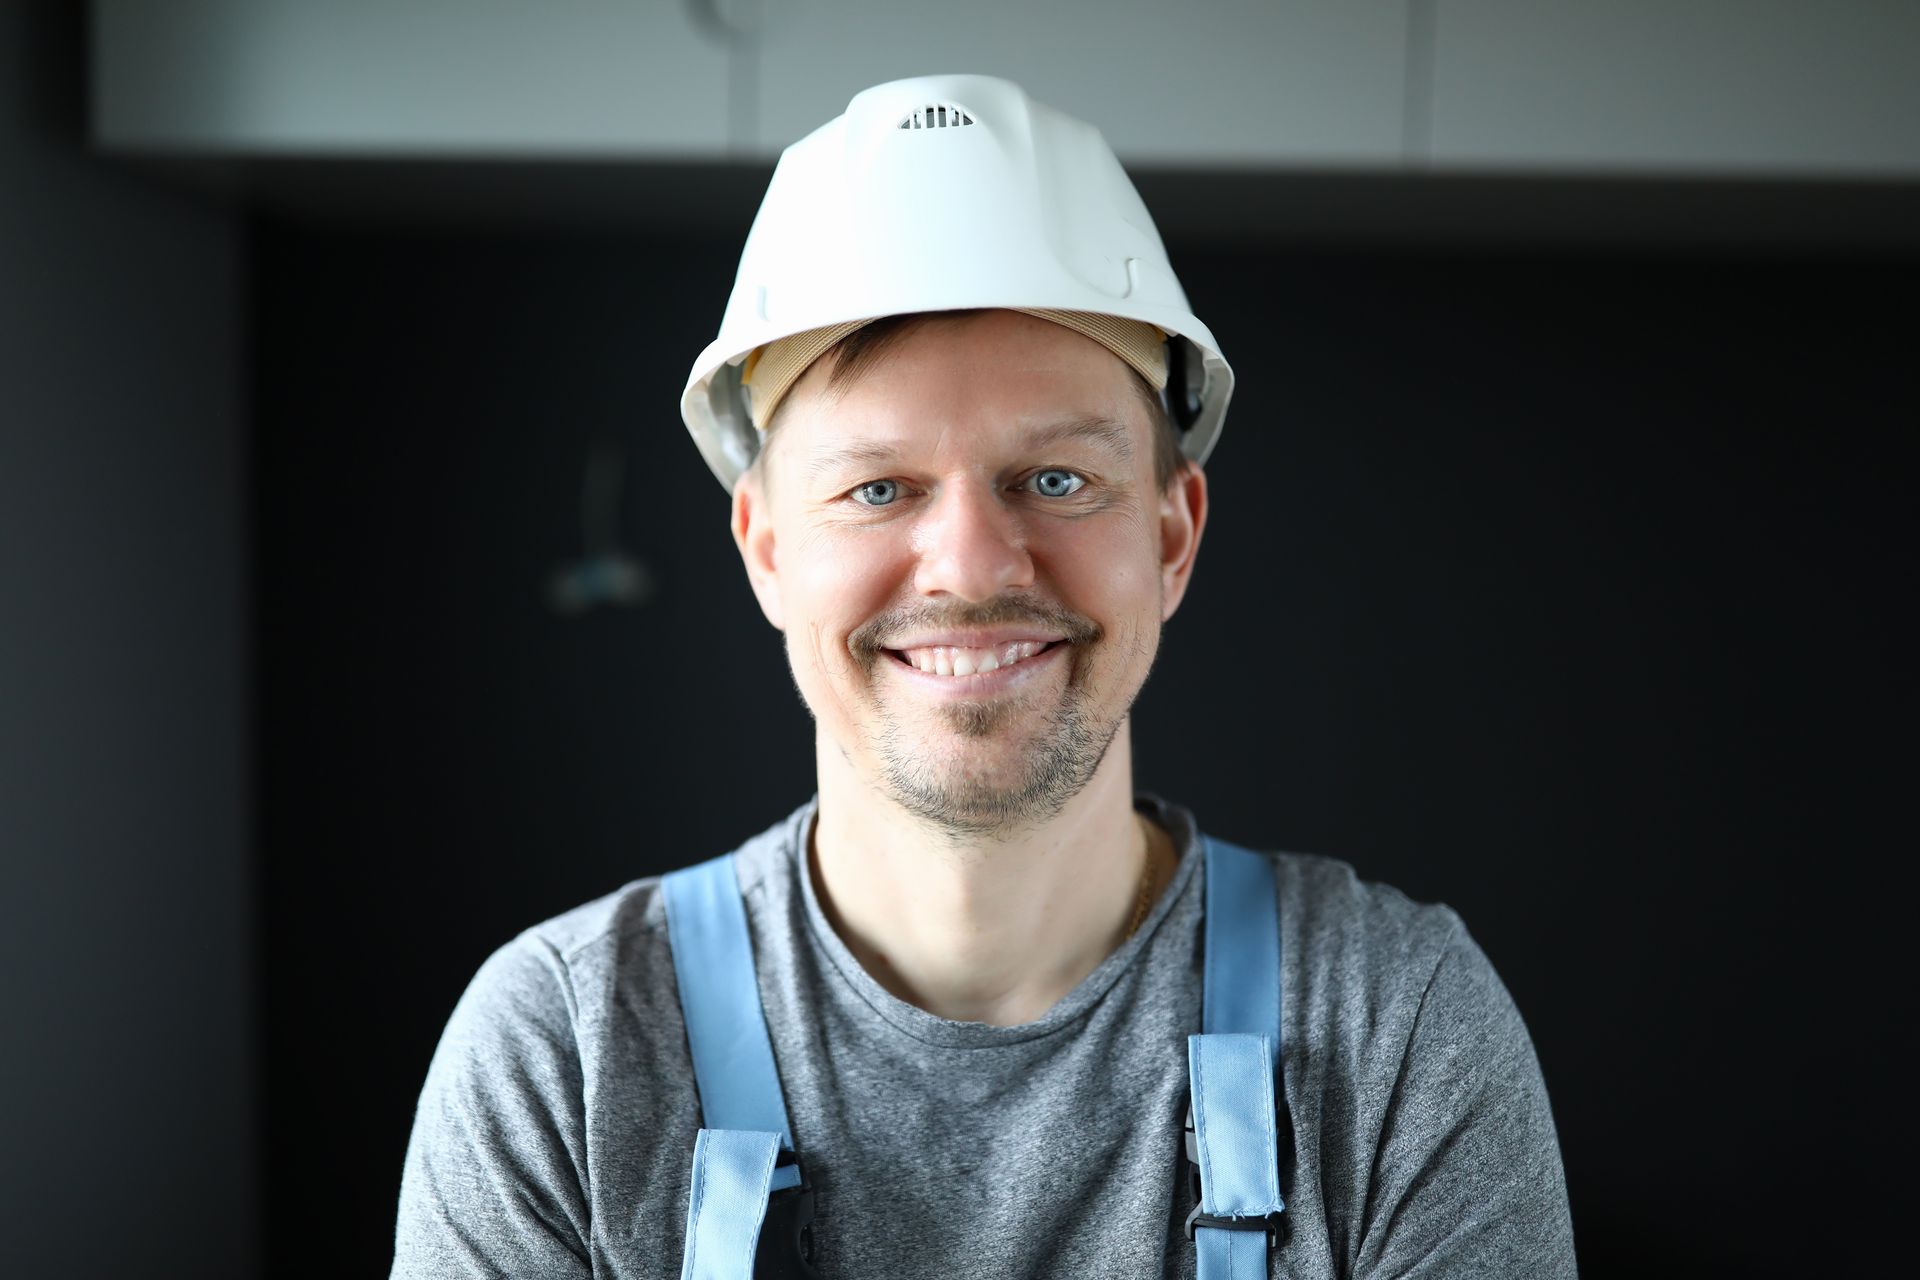 a man wearing a hard hat and overalls is smiling for the camera .